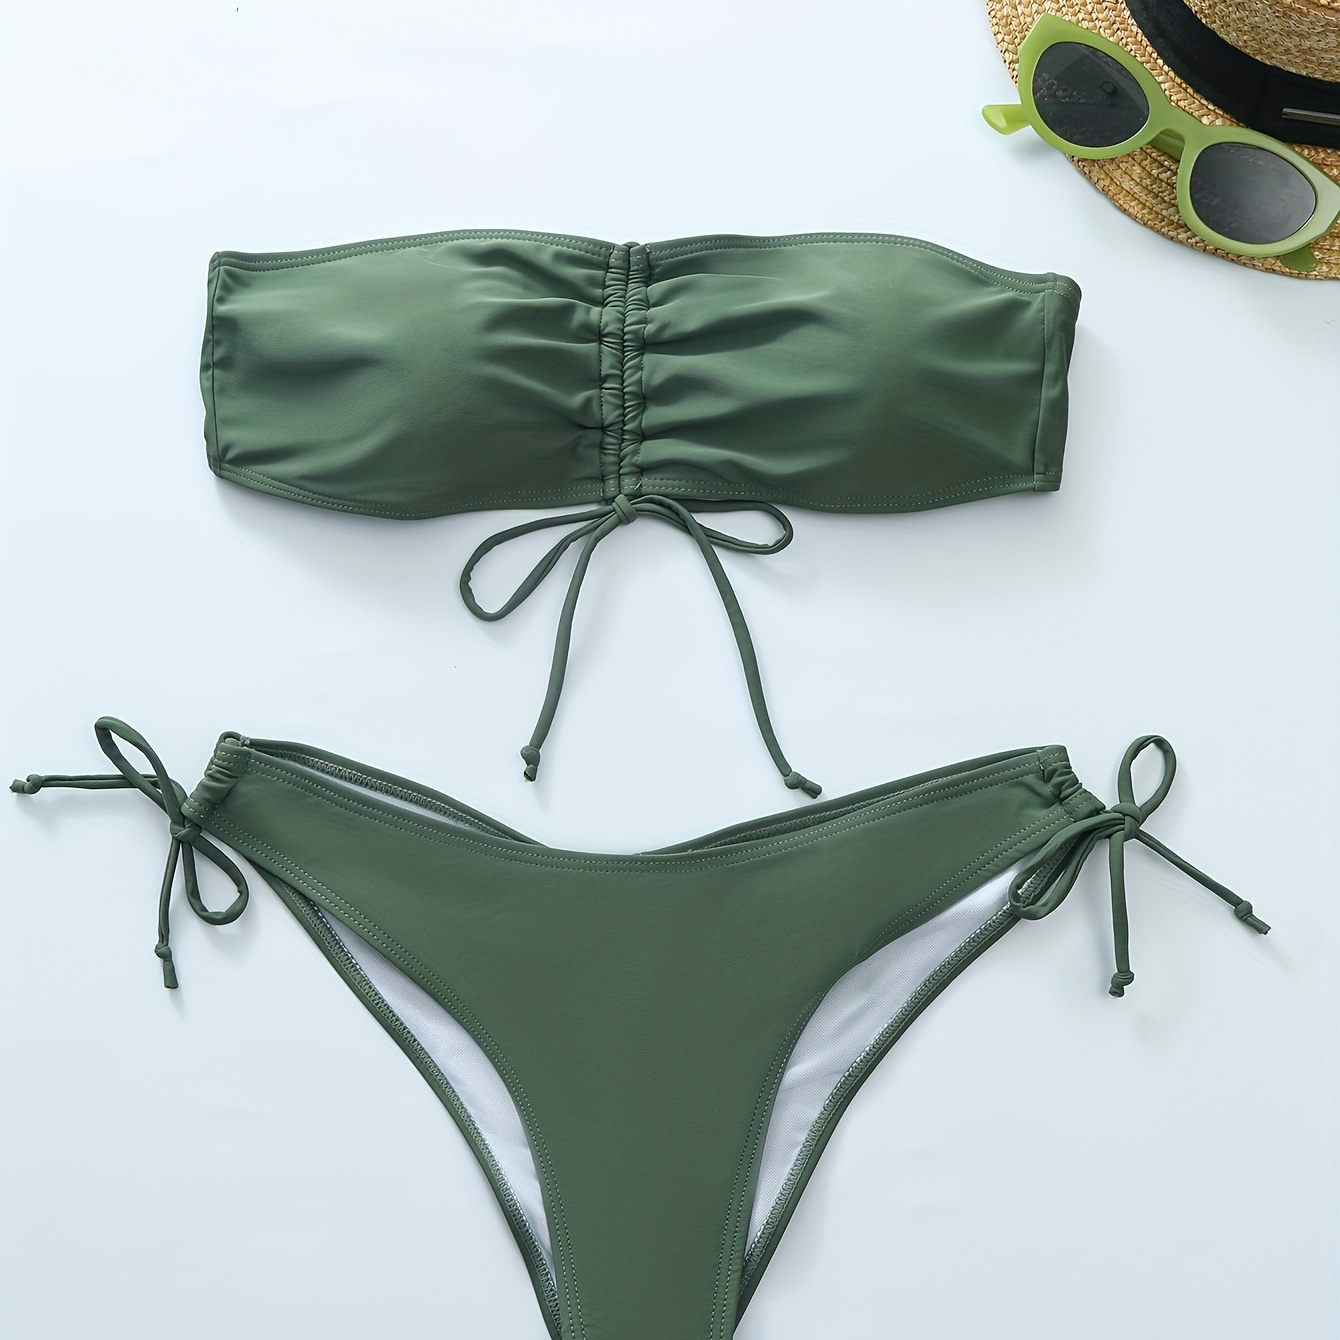 

Solid Color Bandeau 2 Piece Set Bikini, Tube Top Drawstring Tie Front Tie Side High Cut Swimsuits, Women's Swimwear & Clothing